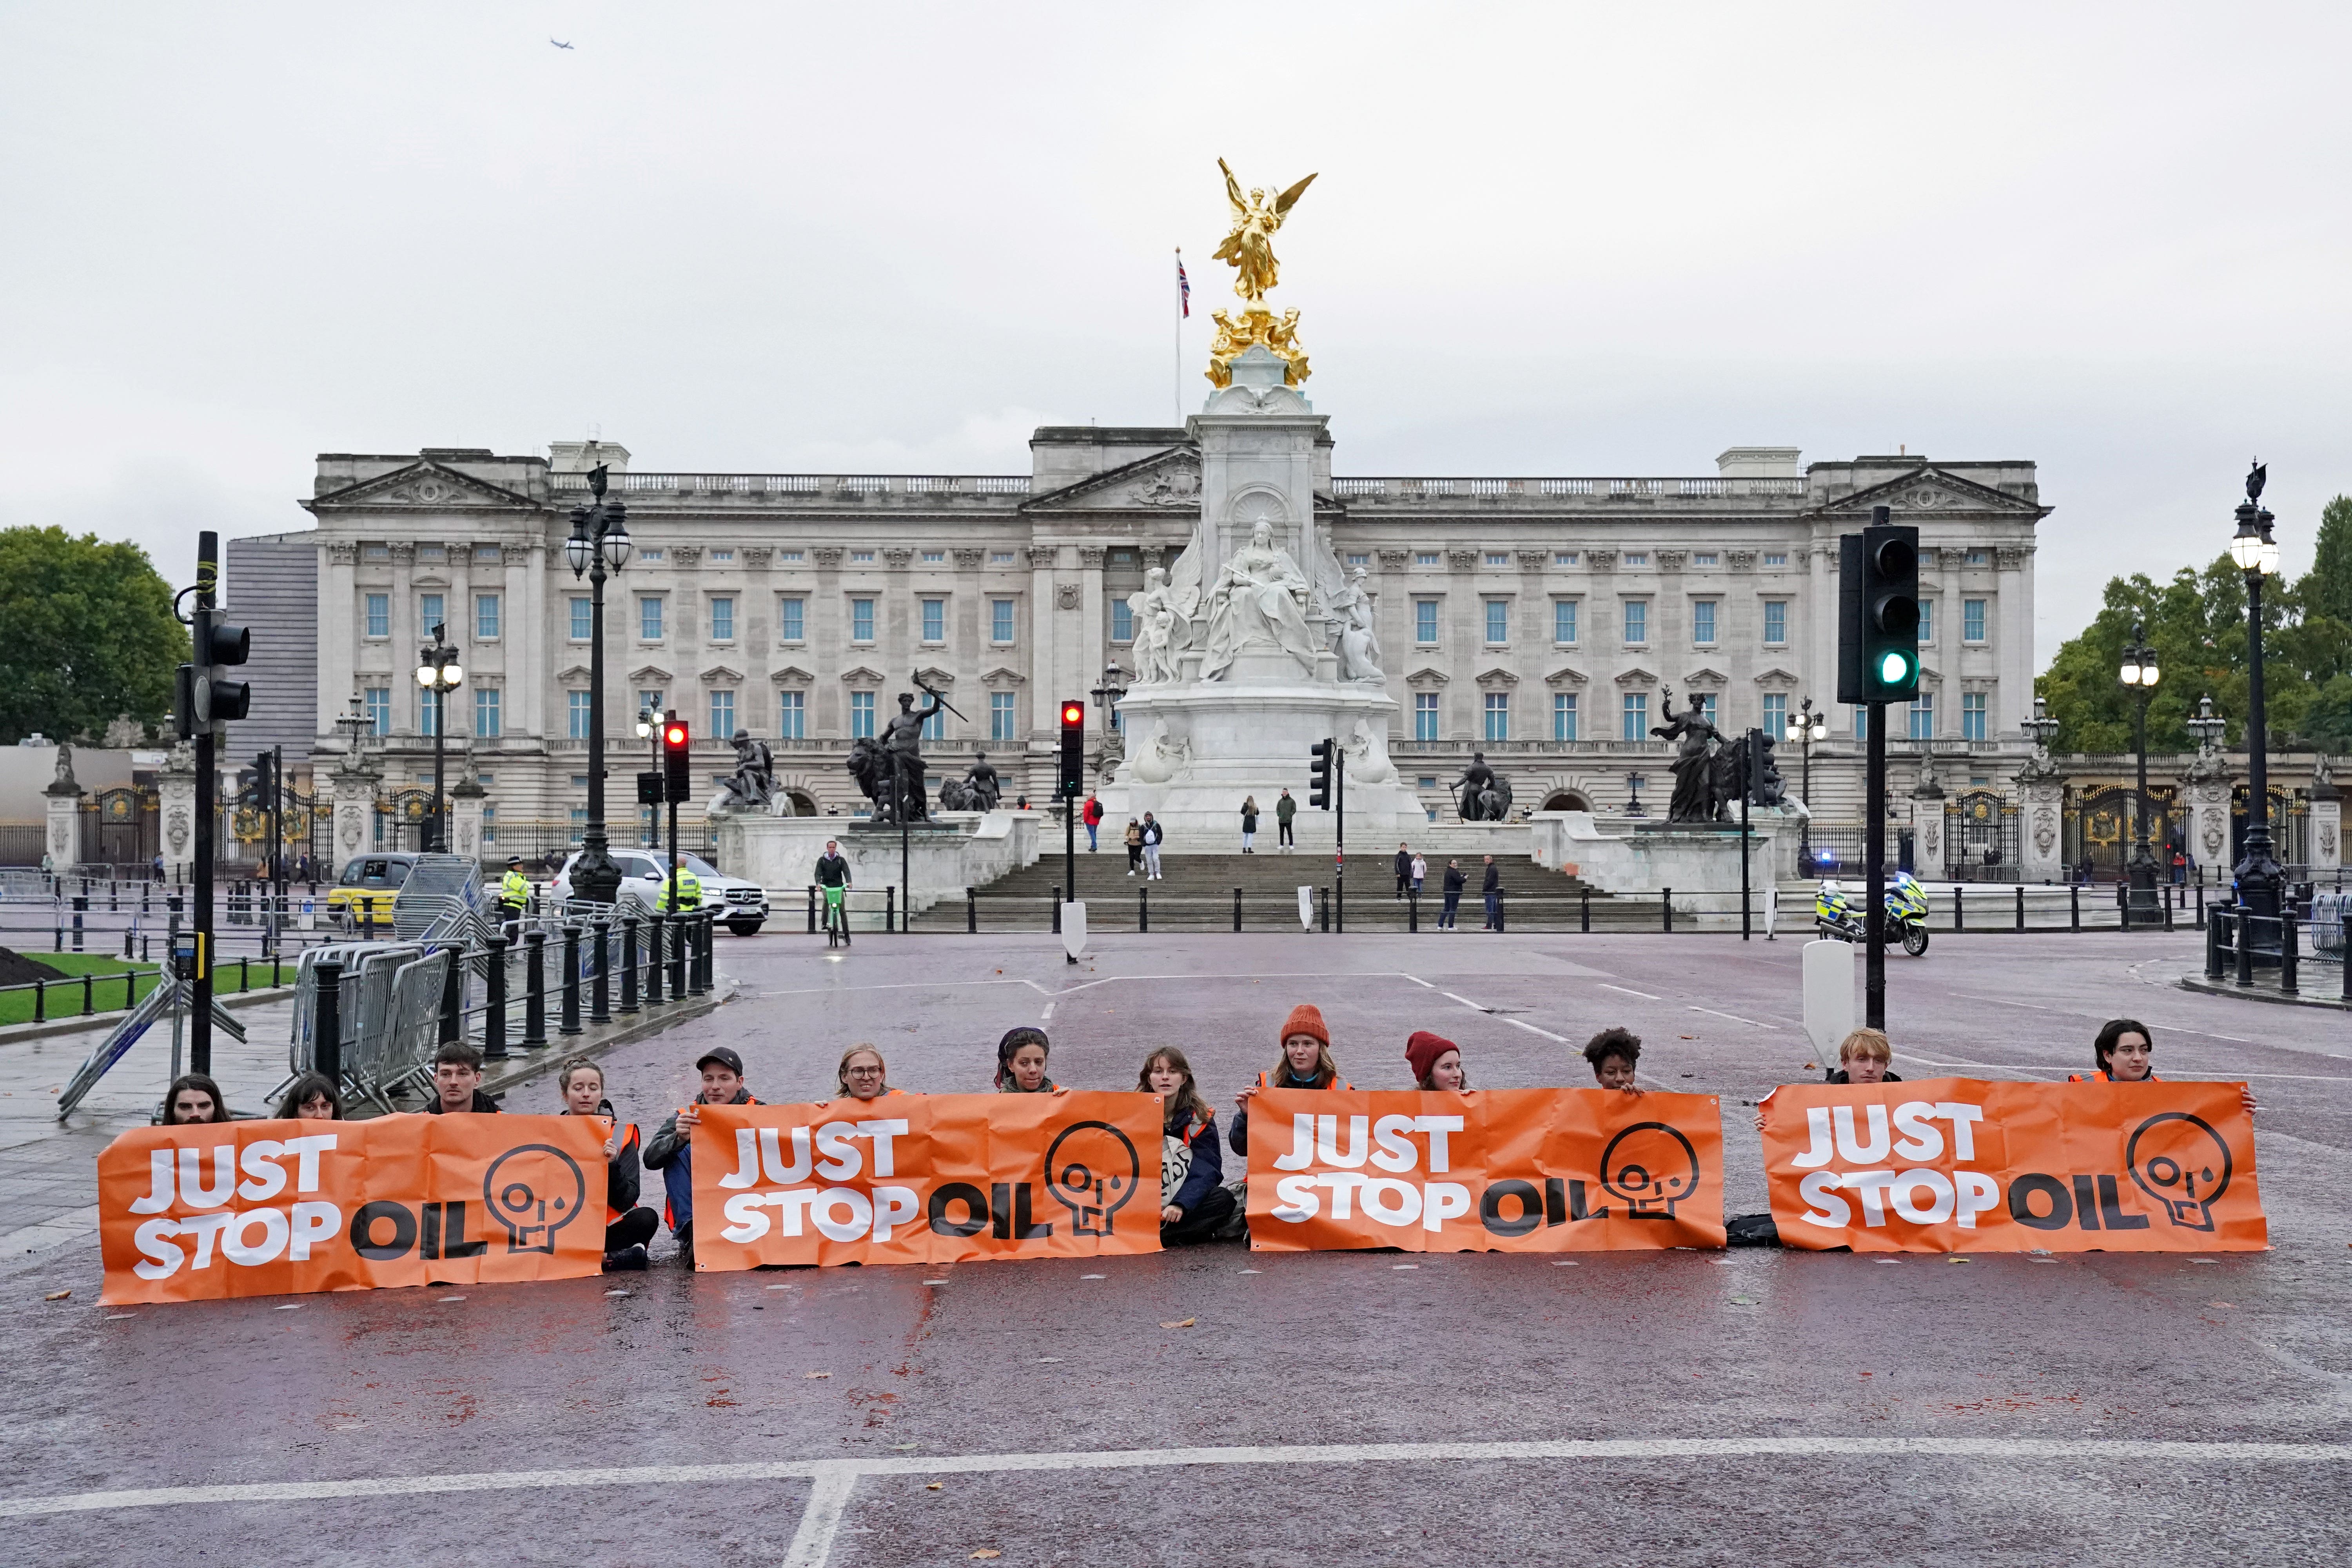 Campaigners from Just Stop Oil block The Mall near Buckingham Palace